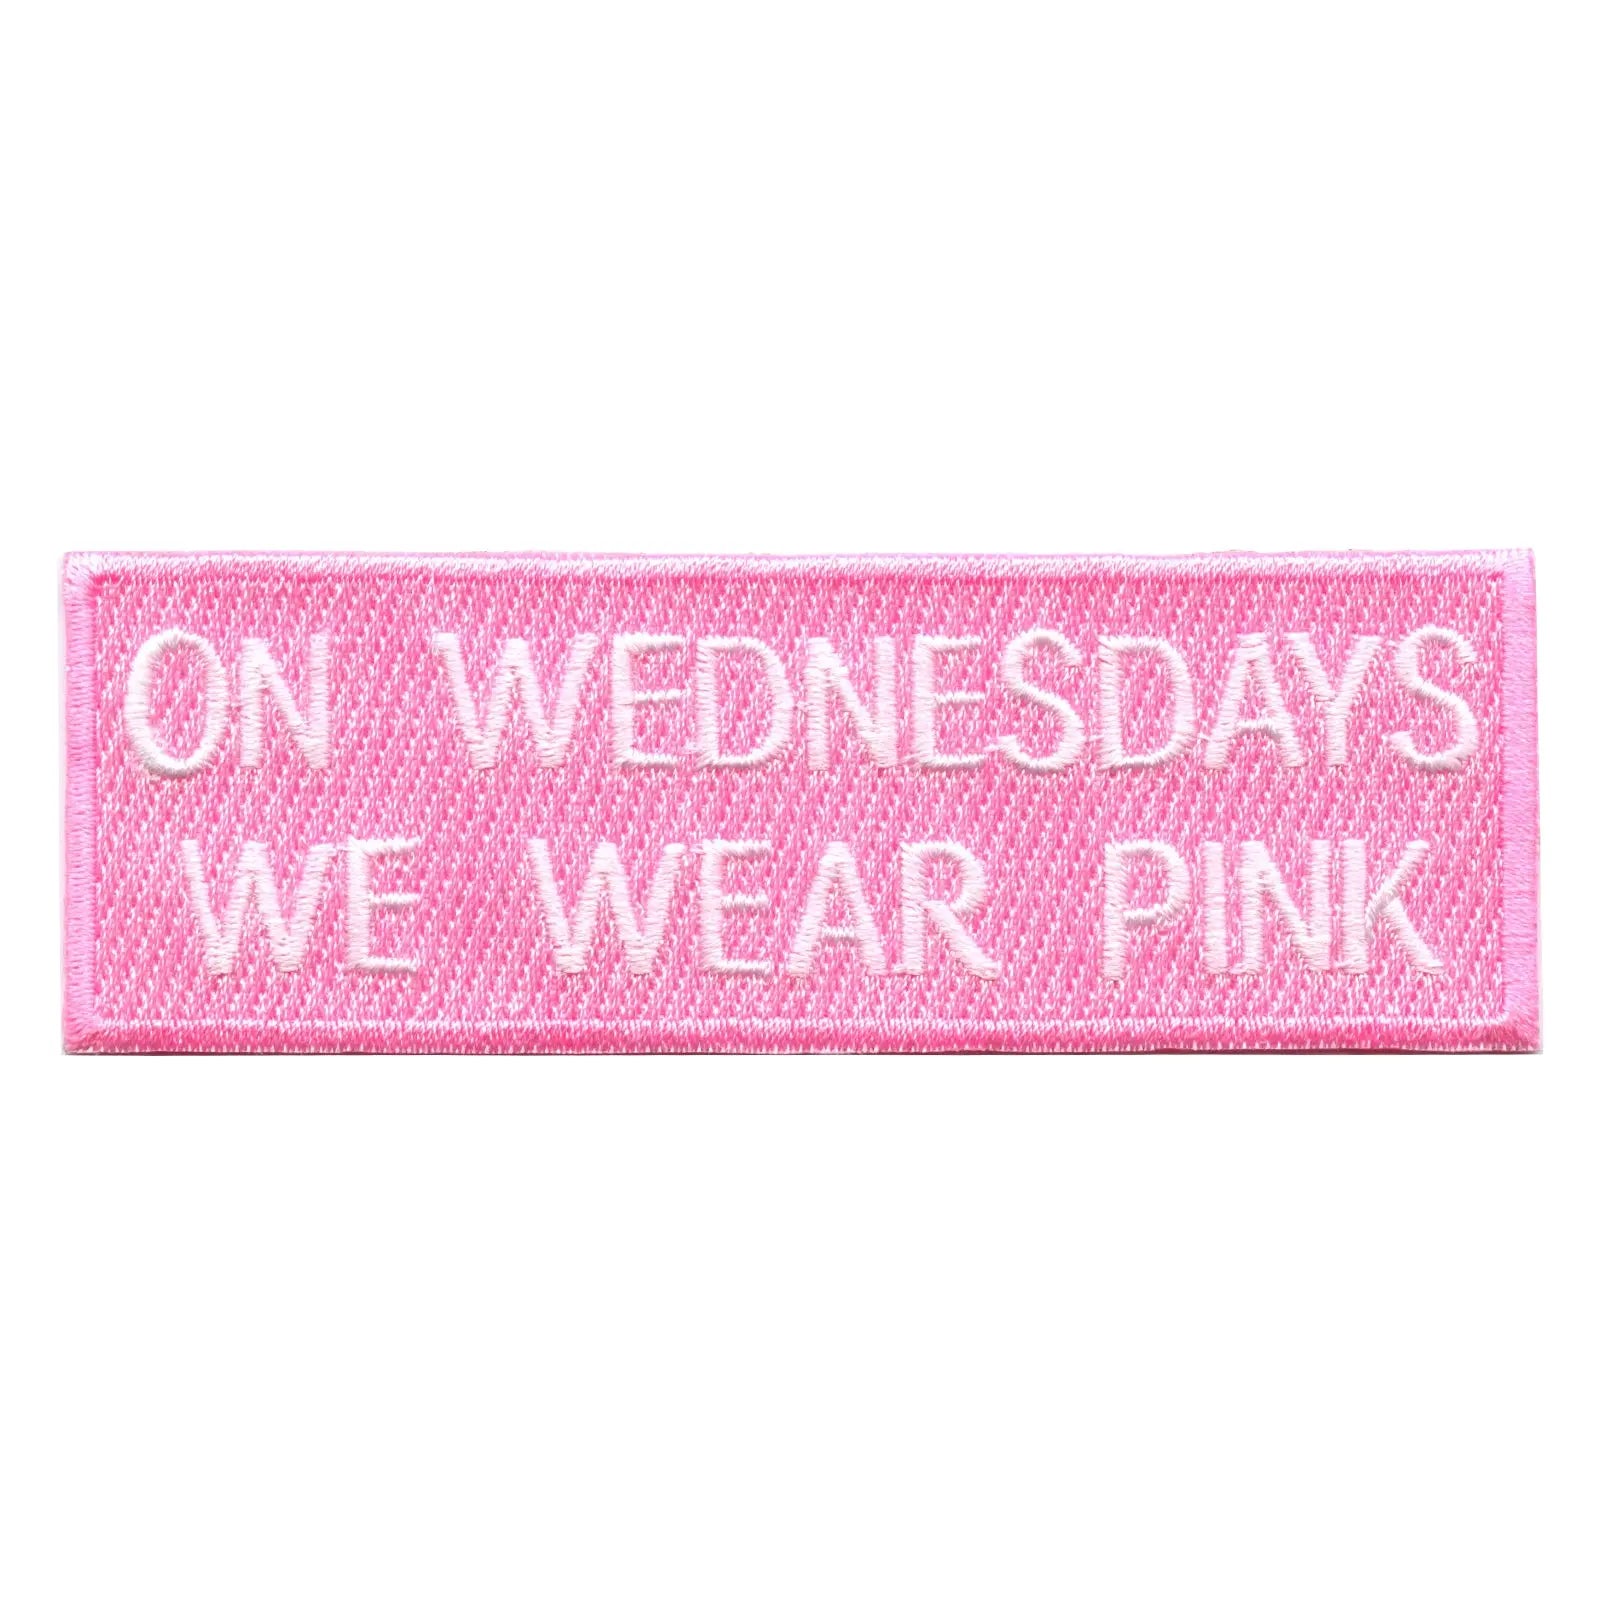 on Wednesdays We Wear Pink Embroidered Iron on Patch